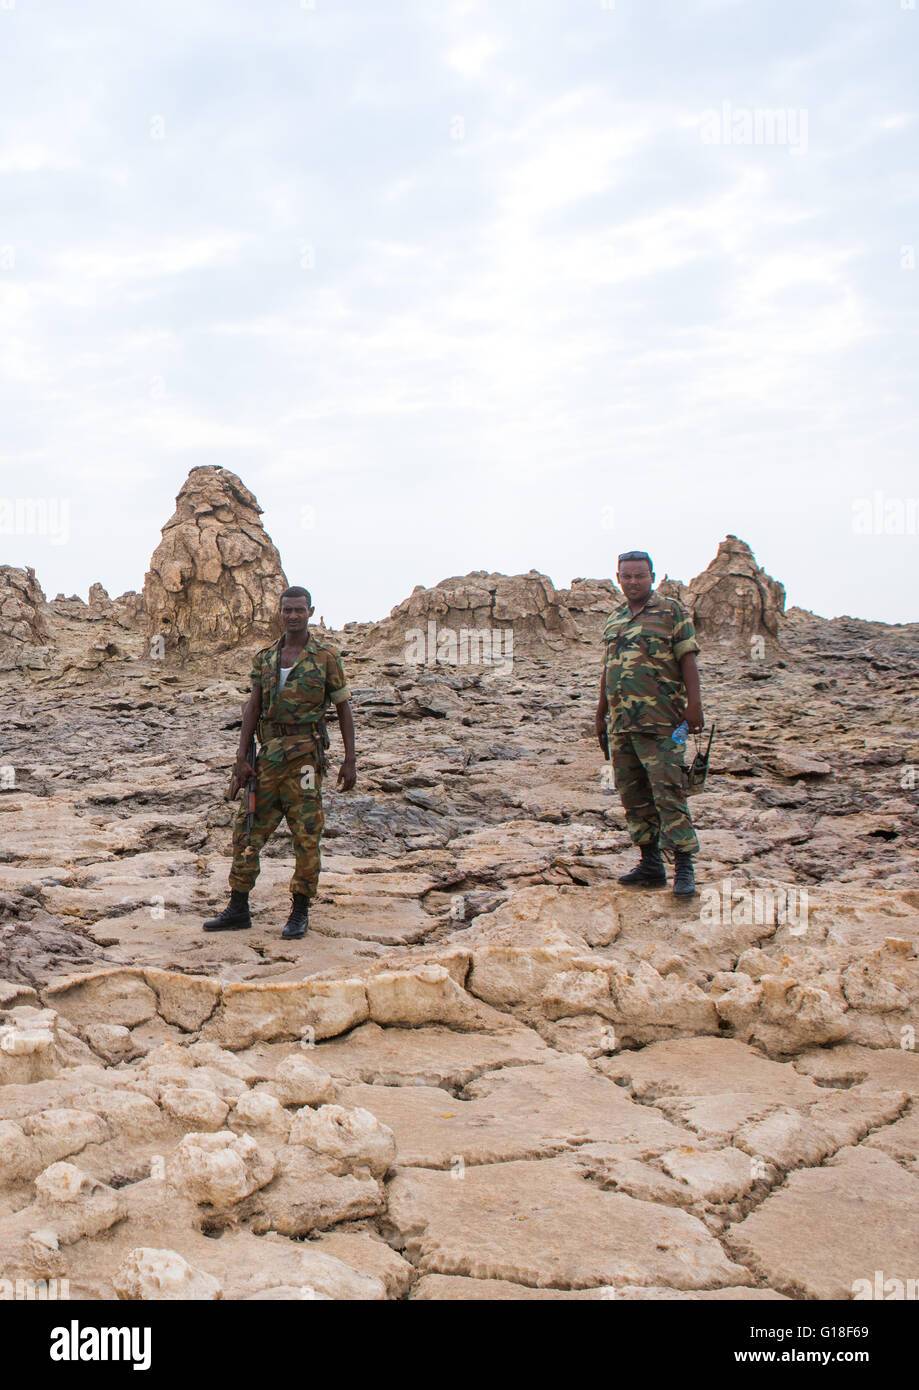 Ethiopian soldiers in front of volcanic formations in the danakil depression, Afar region, Dallol, Ethiopia Stock Photo